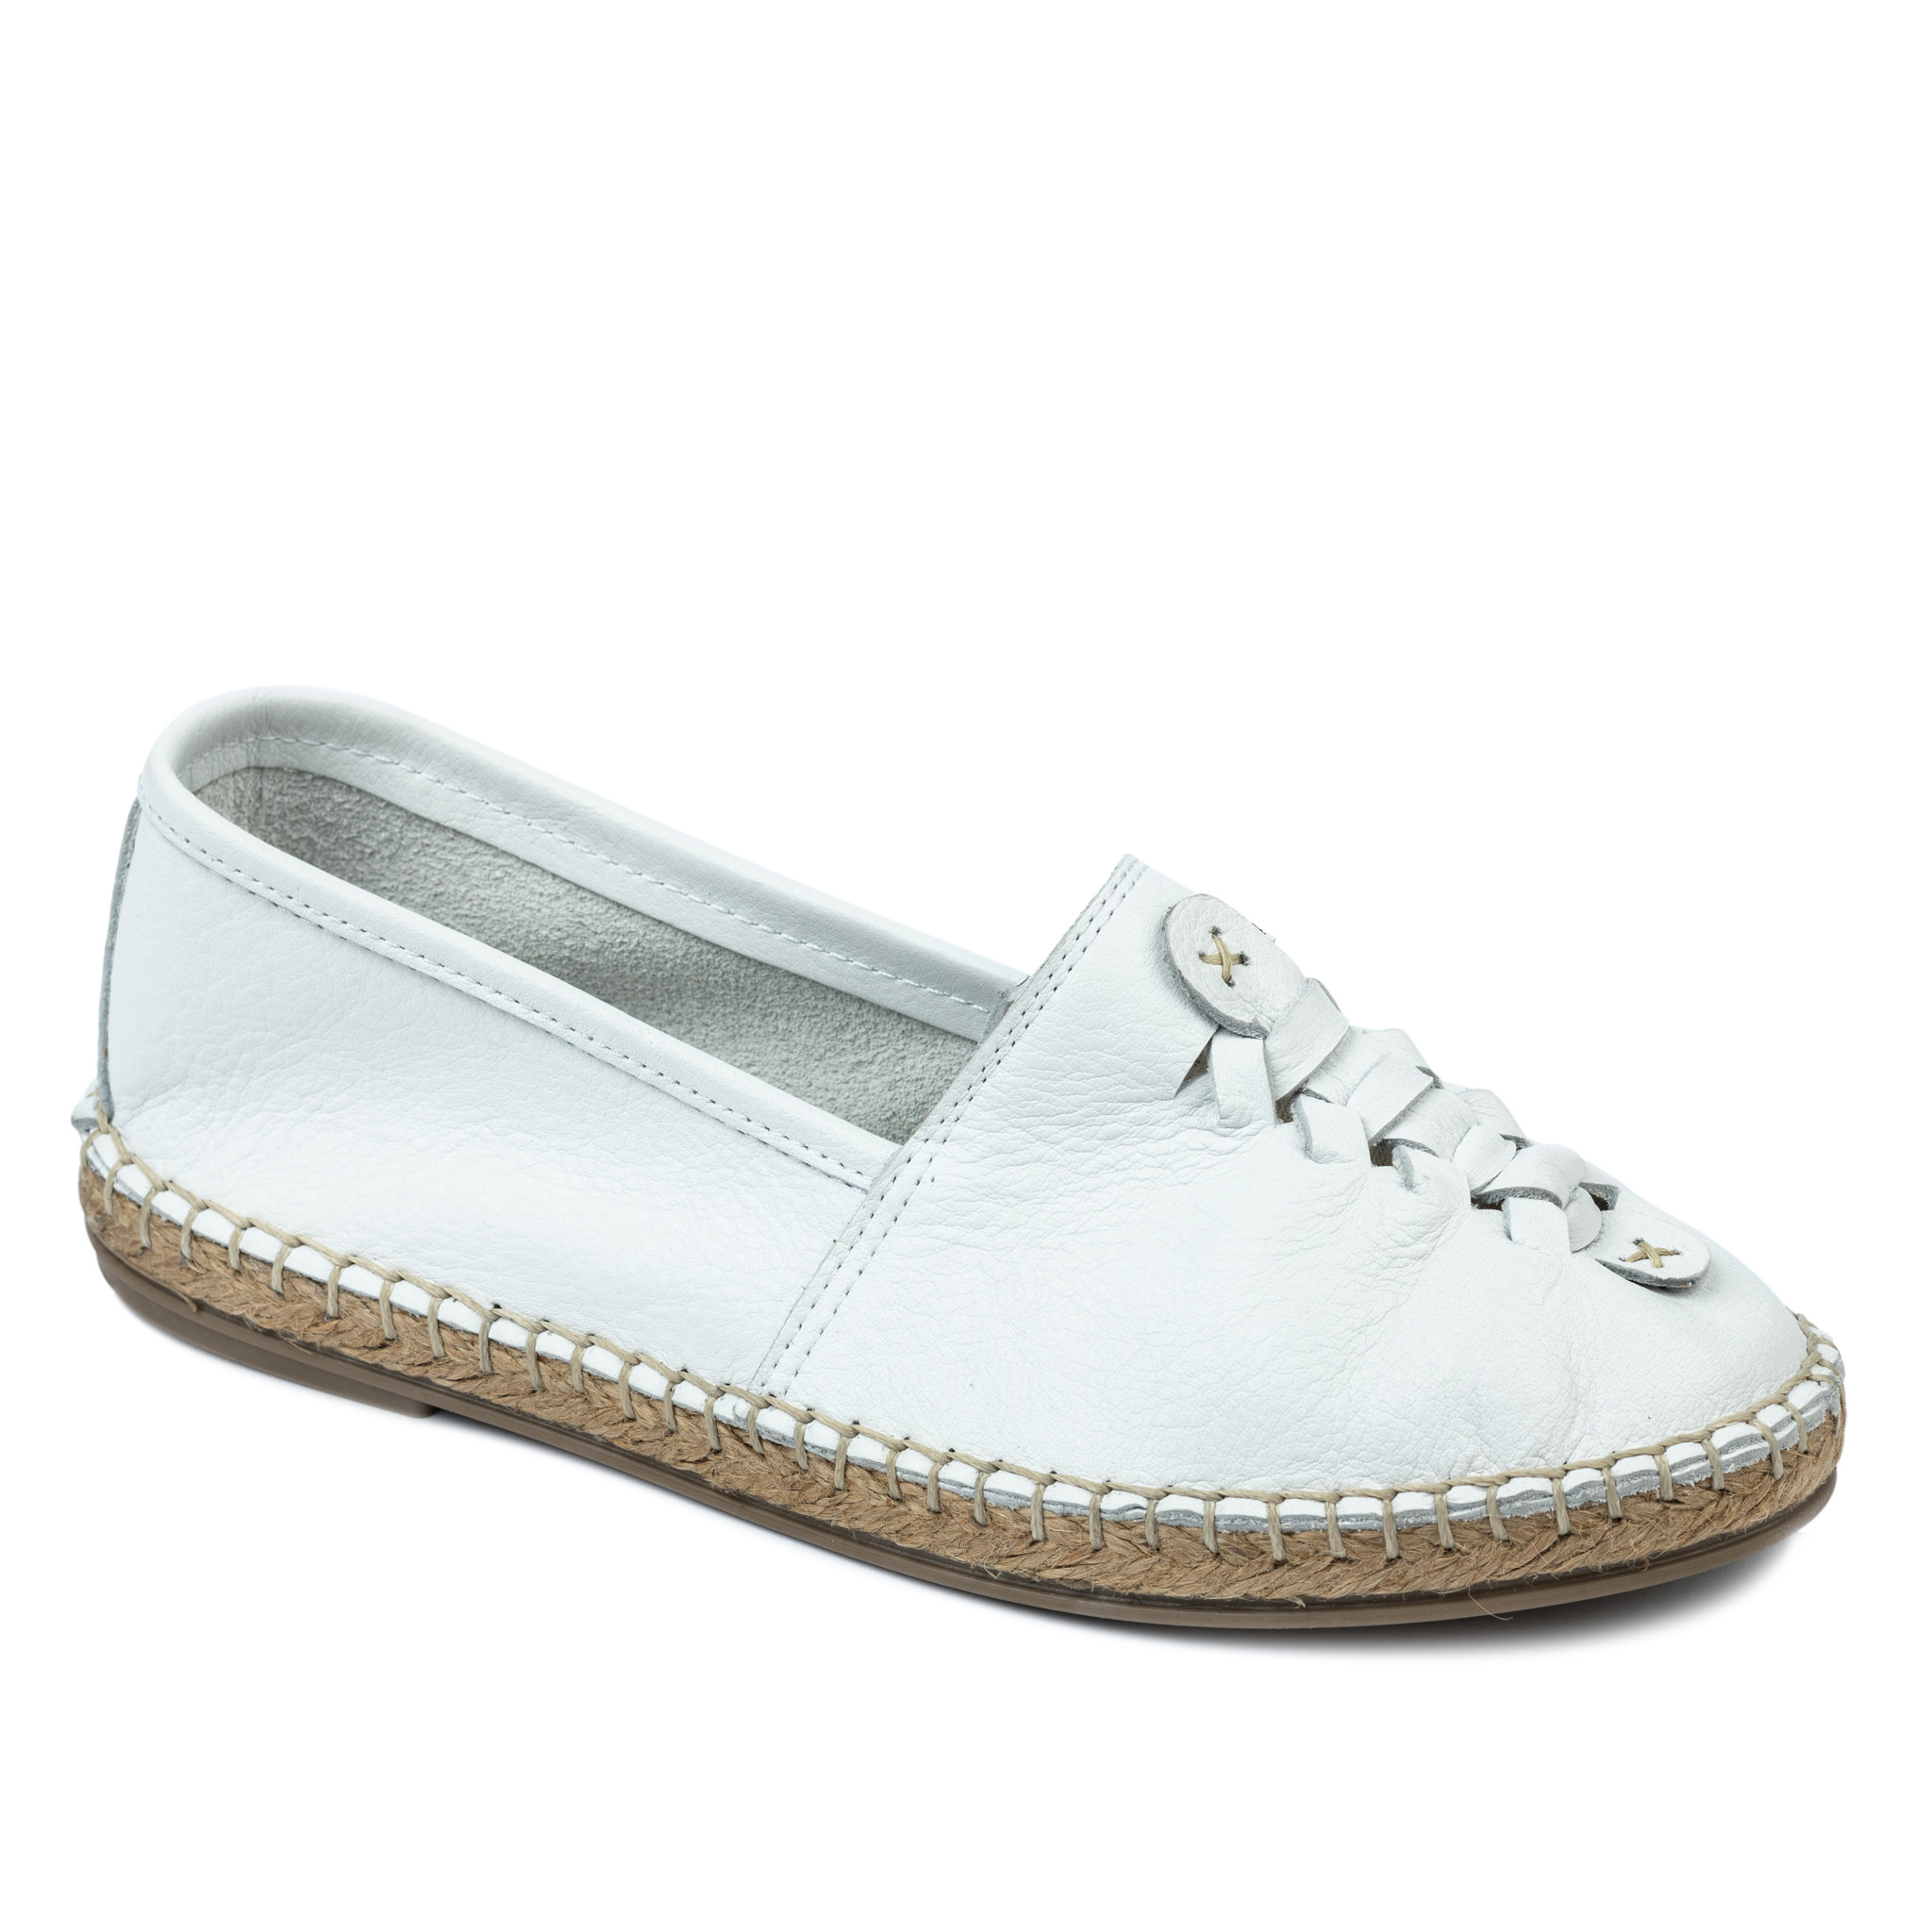 Leather espadrilles A639 - WHITE